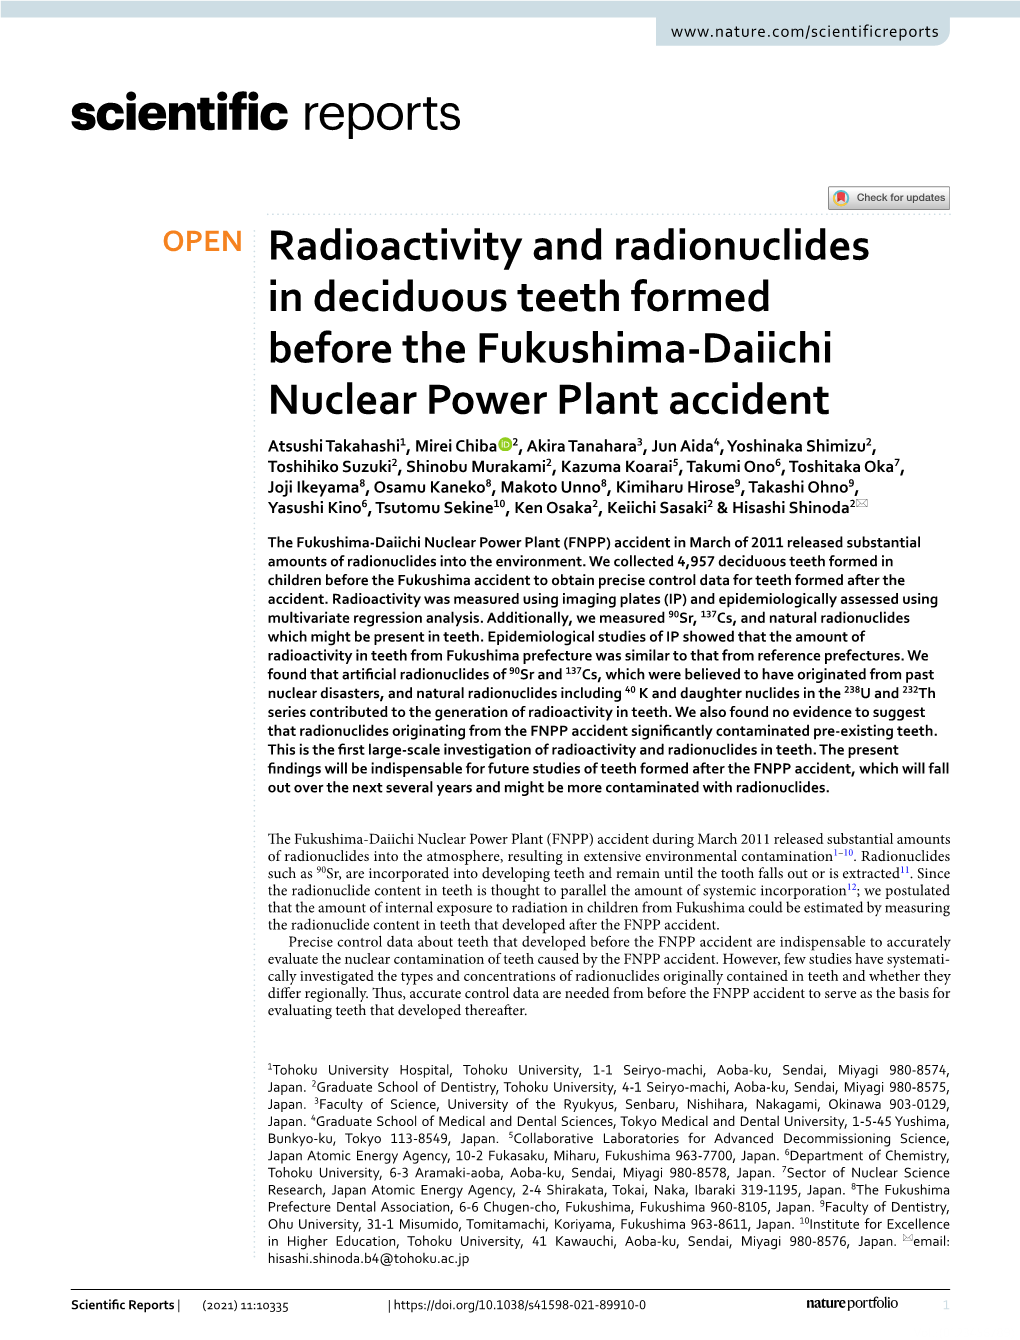 Radioactivity and Radionuclides in Deciduous Teeth Formed Before The